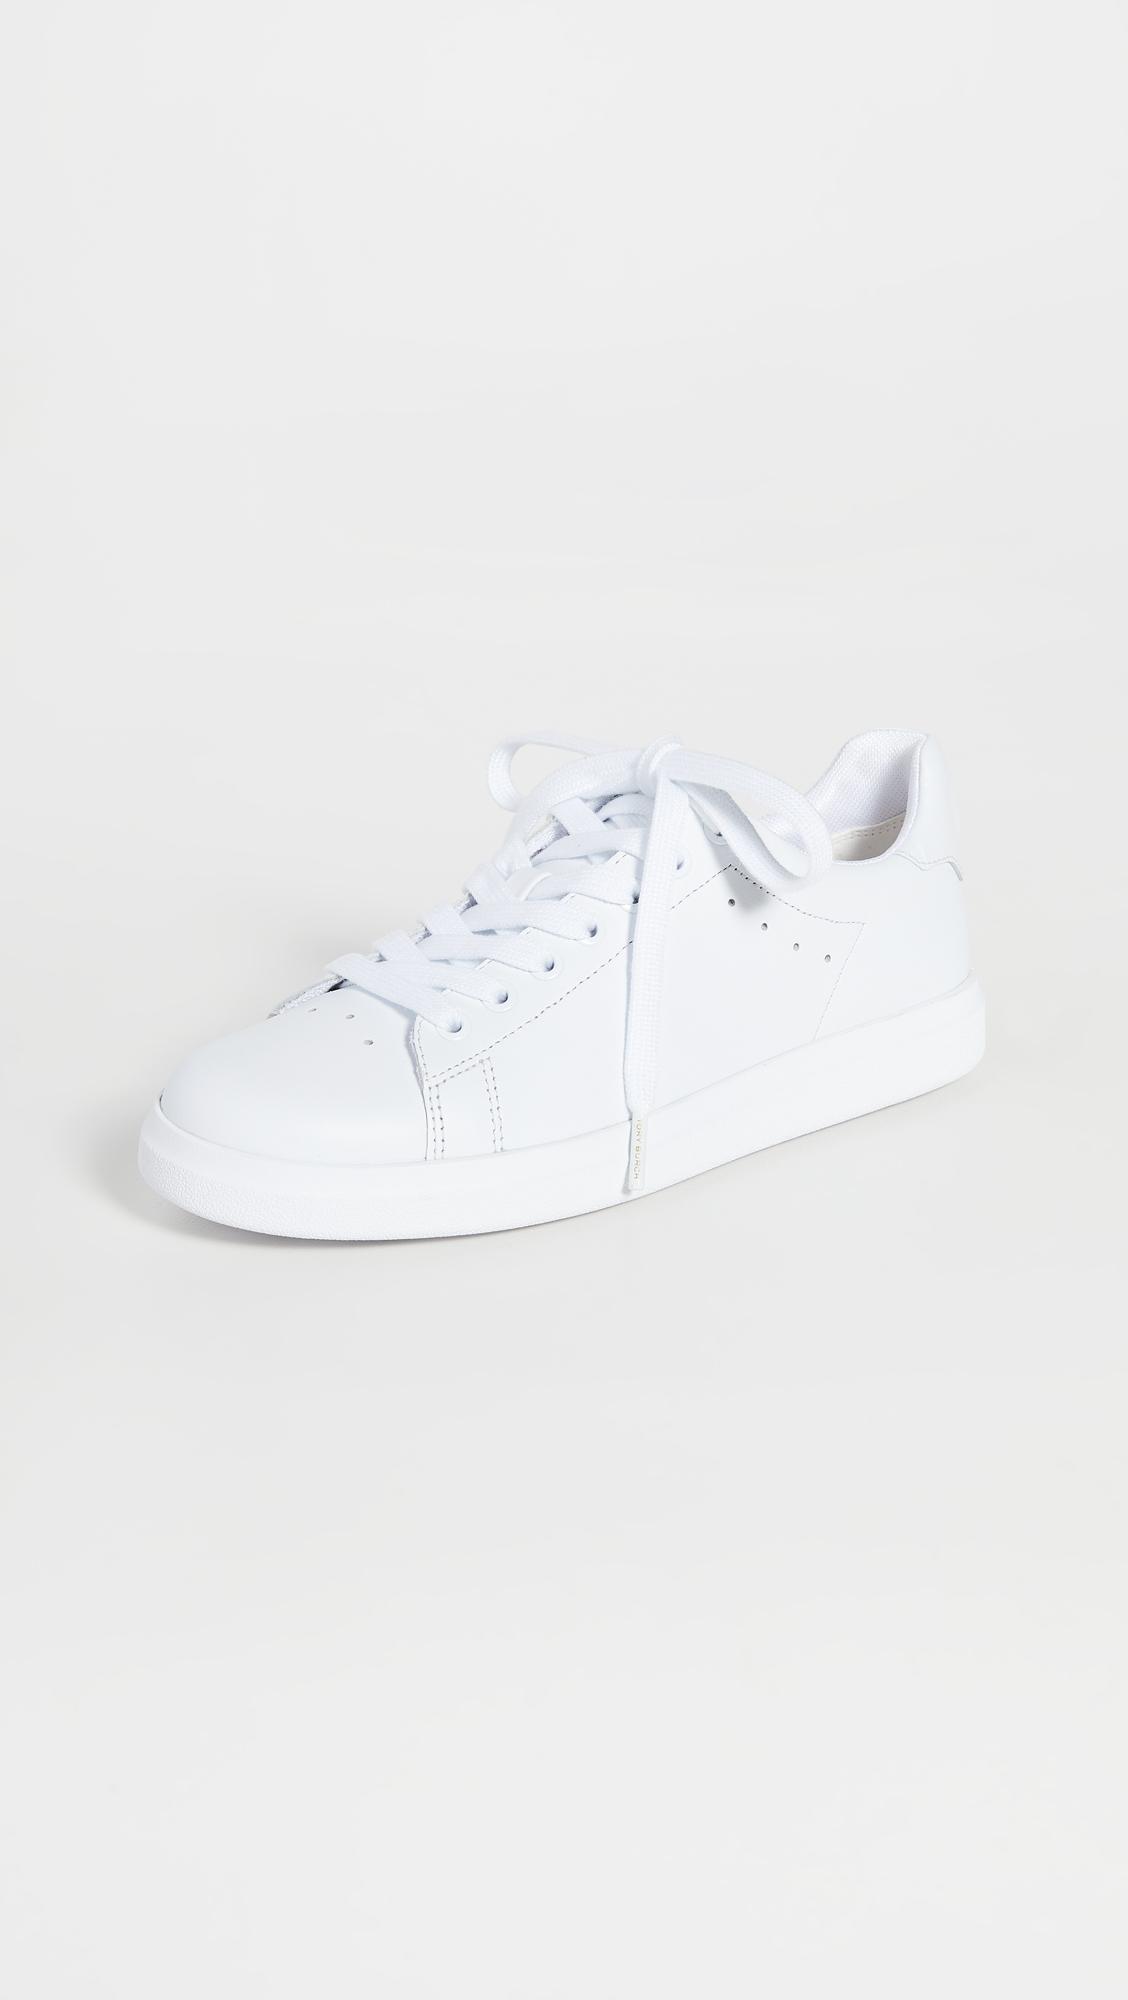 Tory Burch Leather Howell Court Sneakers in Titanium White/Titanium ...